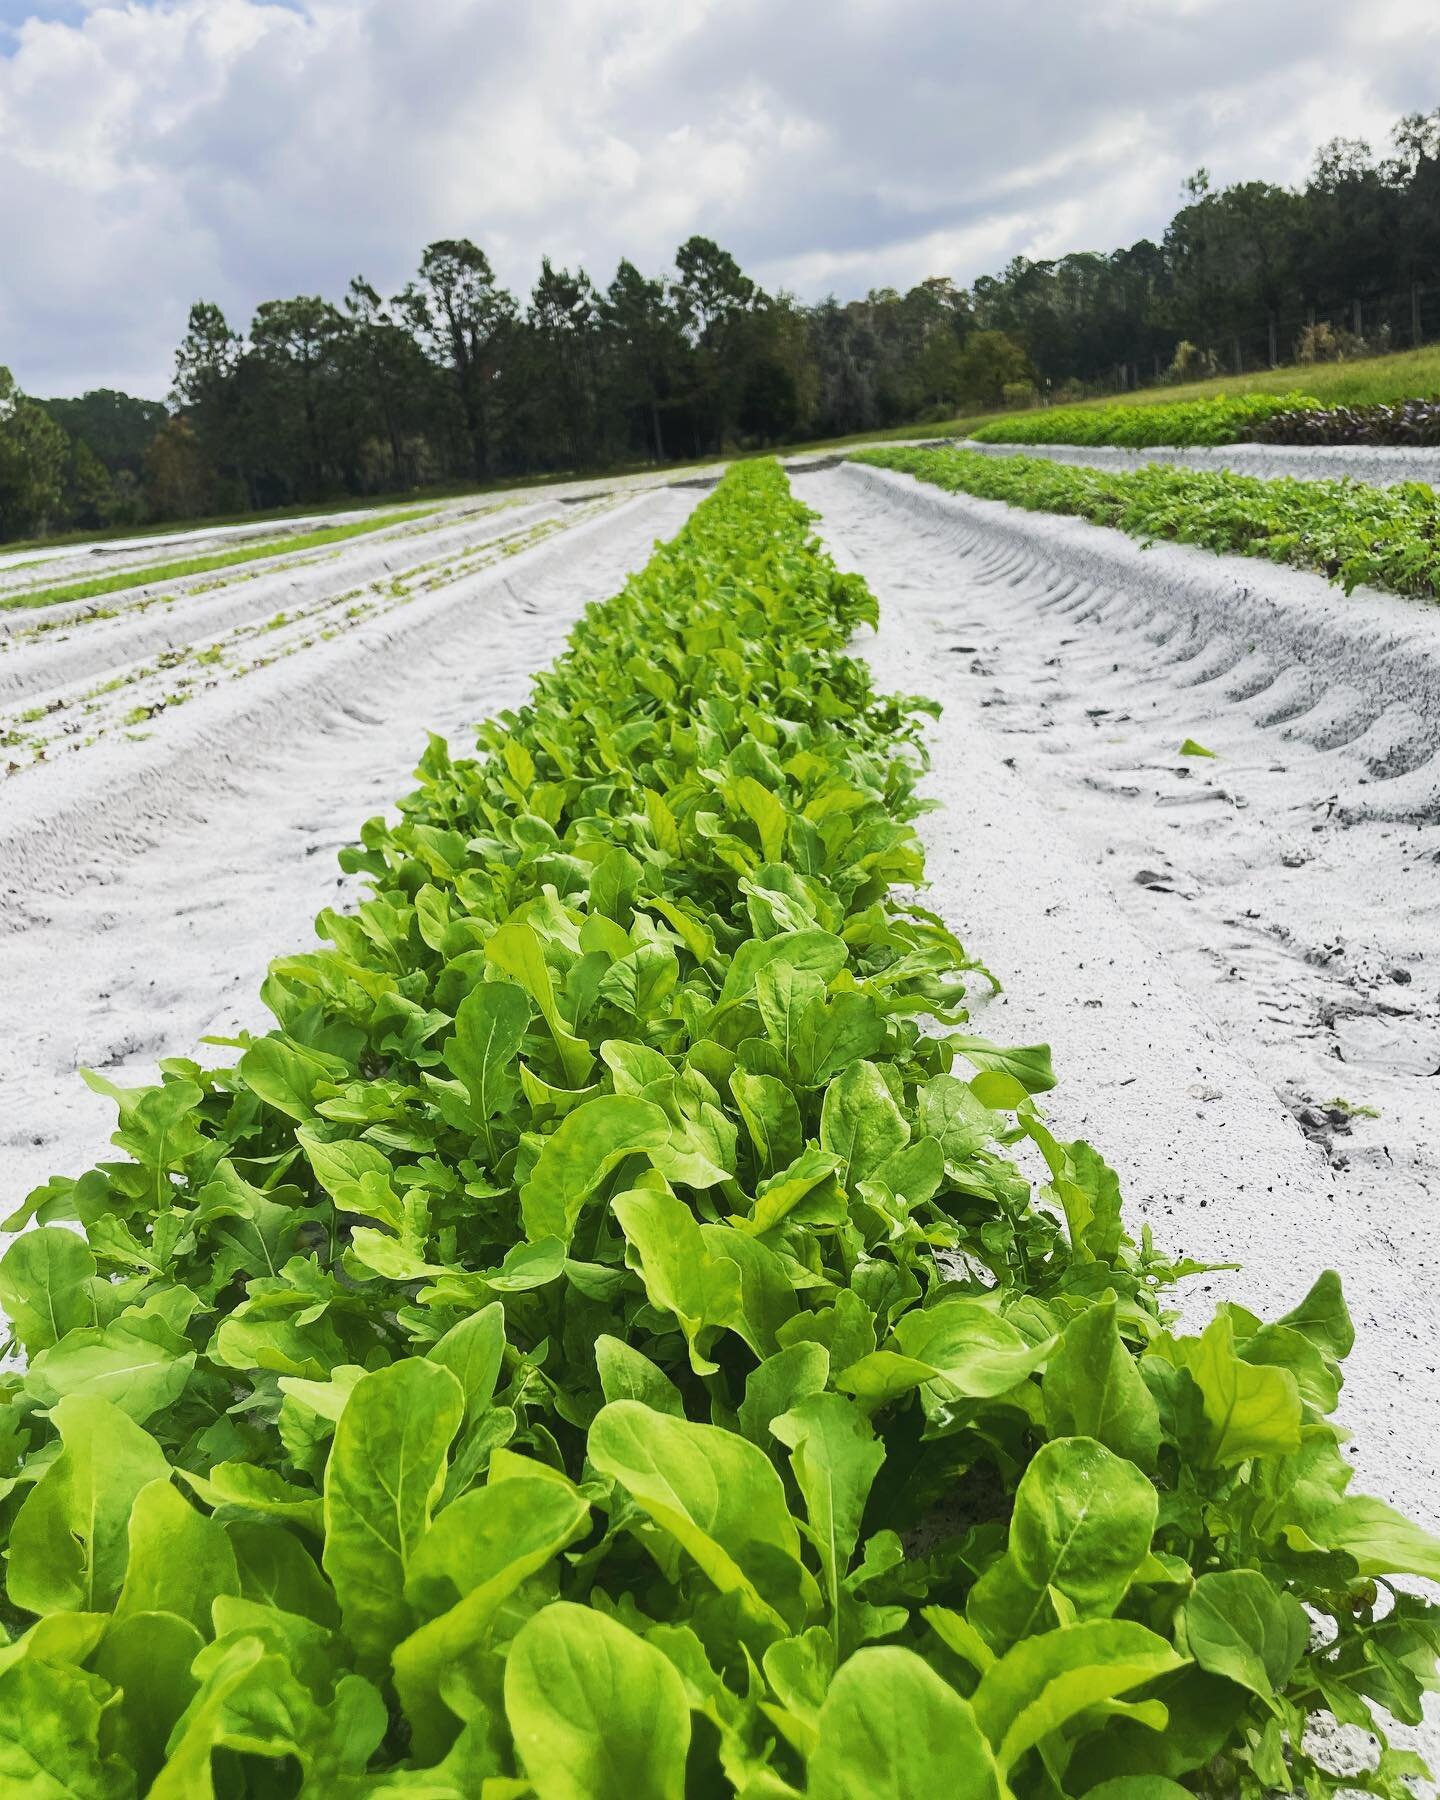 The greens have arrived! #floridagreens #floridafarmer #loveyourgreens